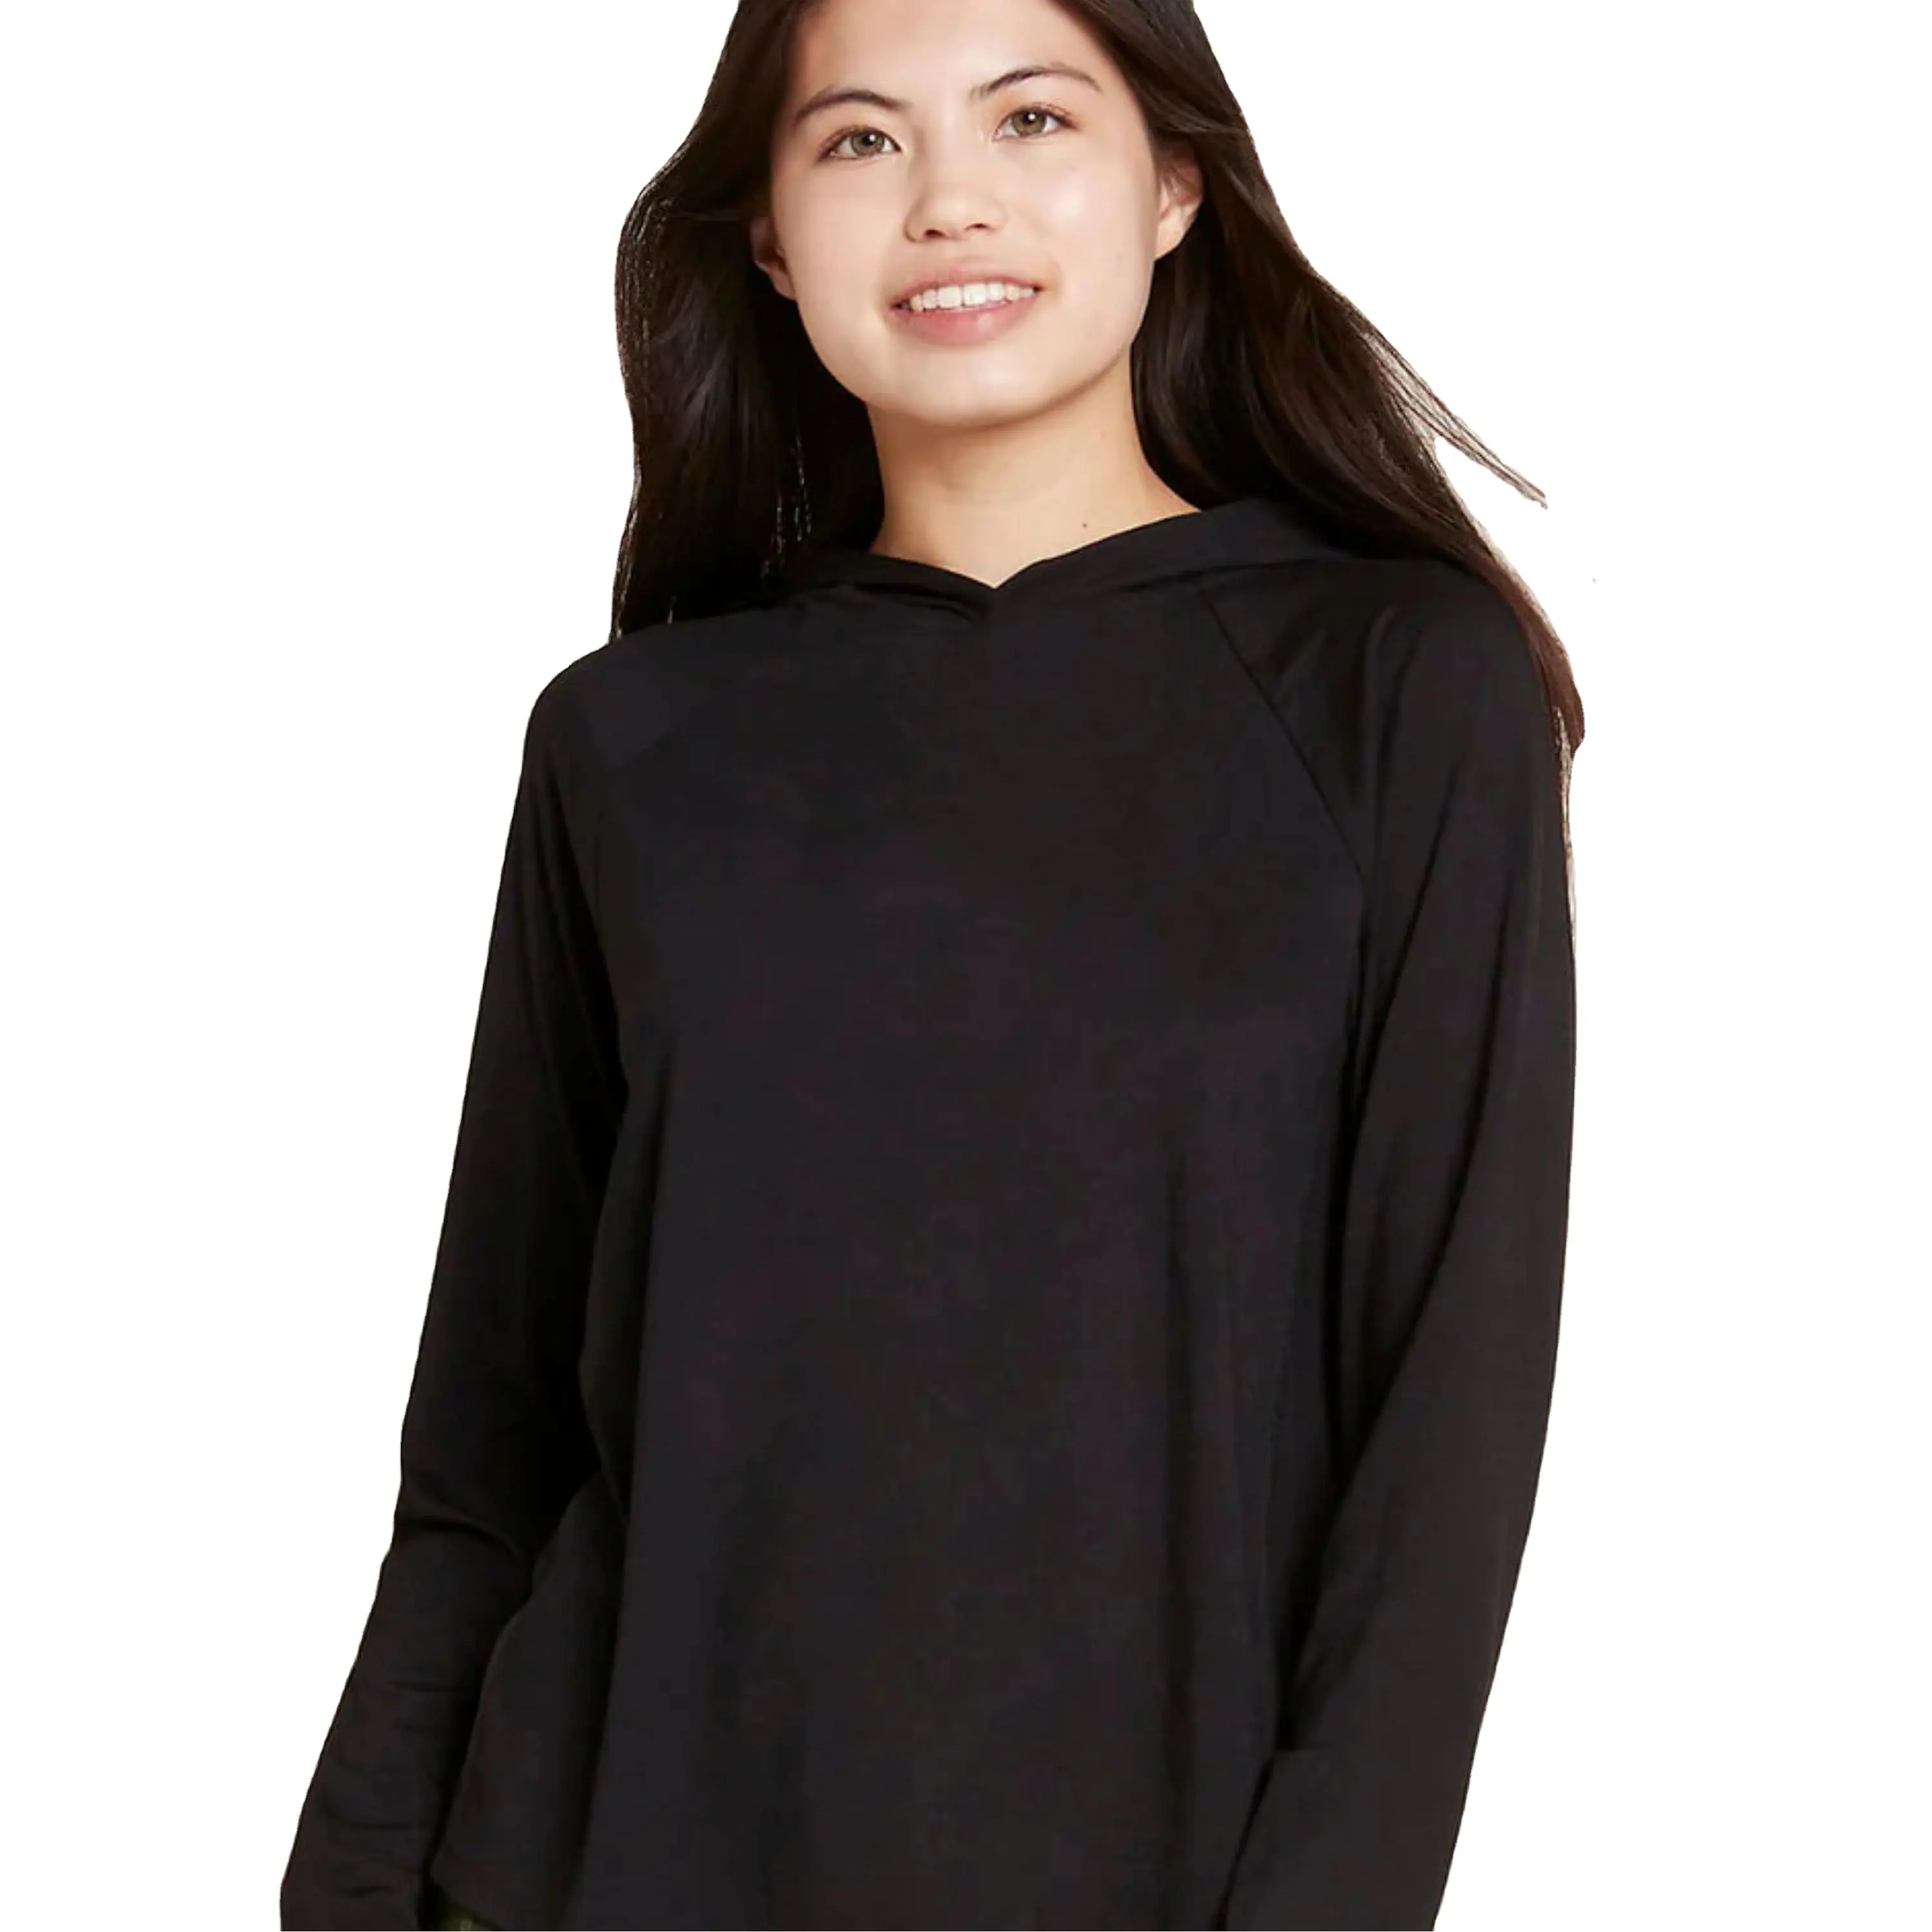 Women Comfortable Hooded T-Shirt | Soft Cotton Blend Lightweight Perfect for Everyday Casual Wear and Layering Options